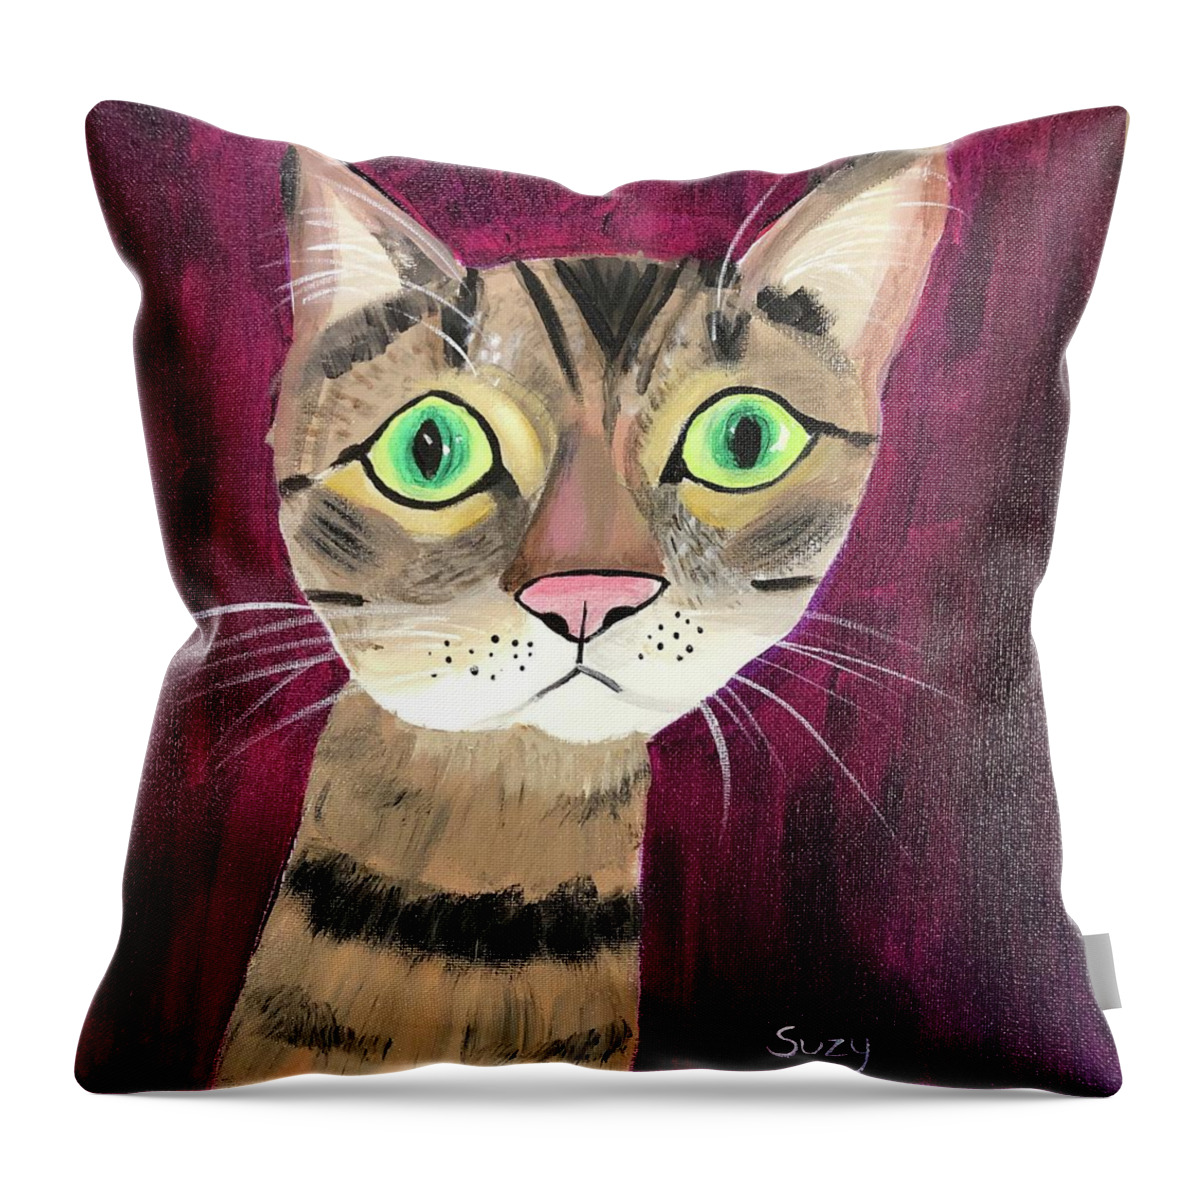 Suzymandelcanter Throw Pillow featuring the painting Dozo by Suzy Mandel-Canter